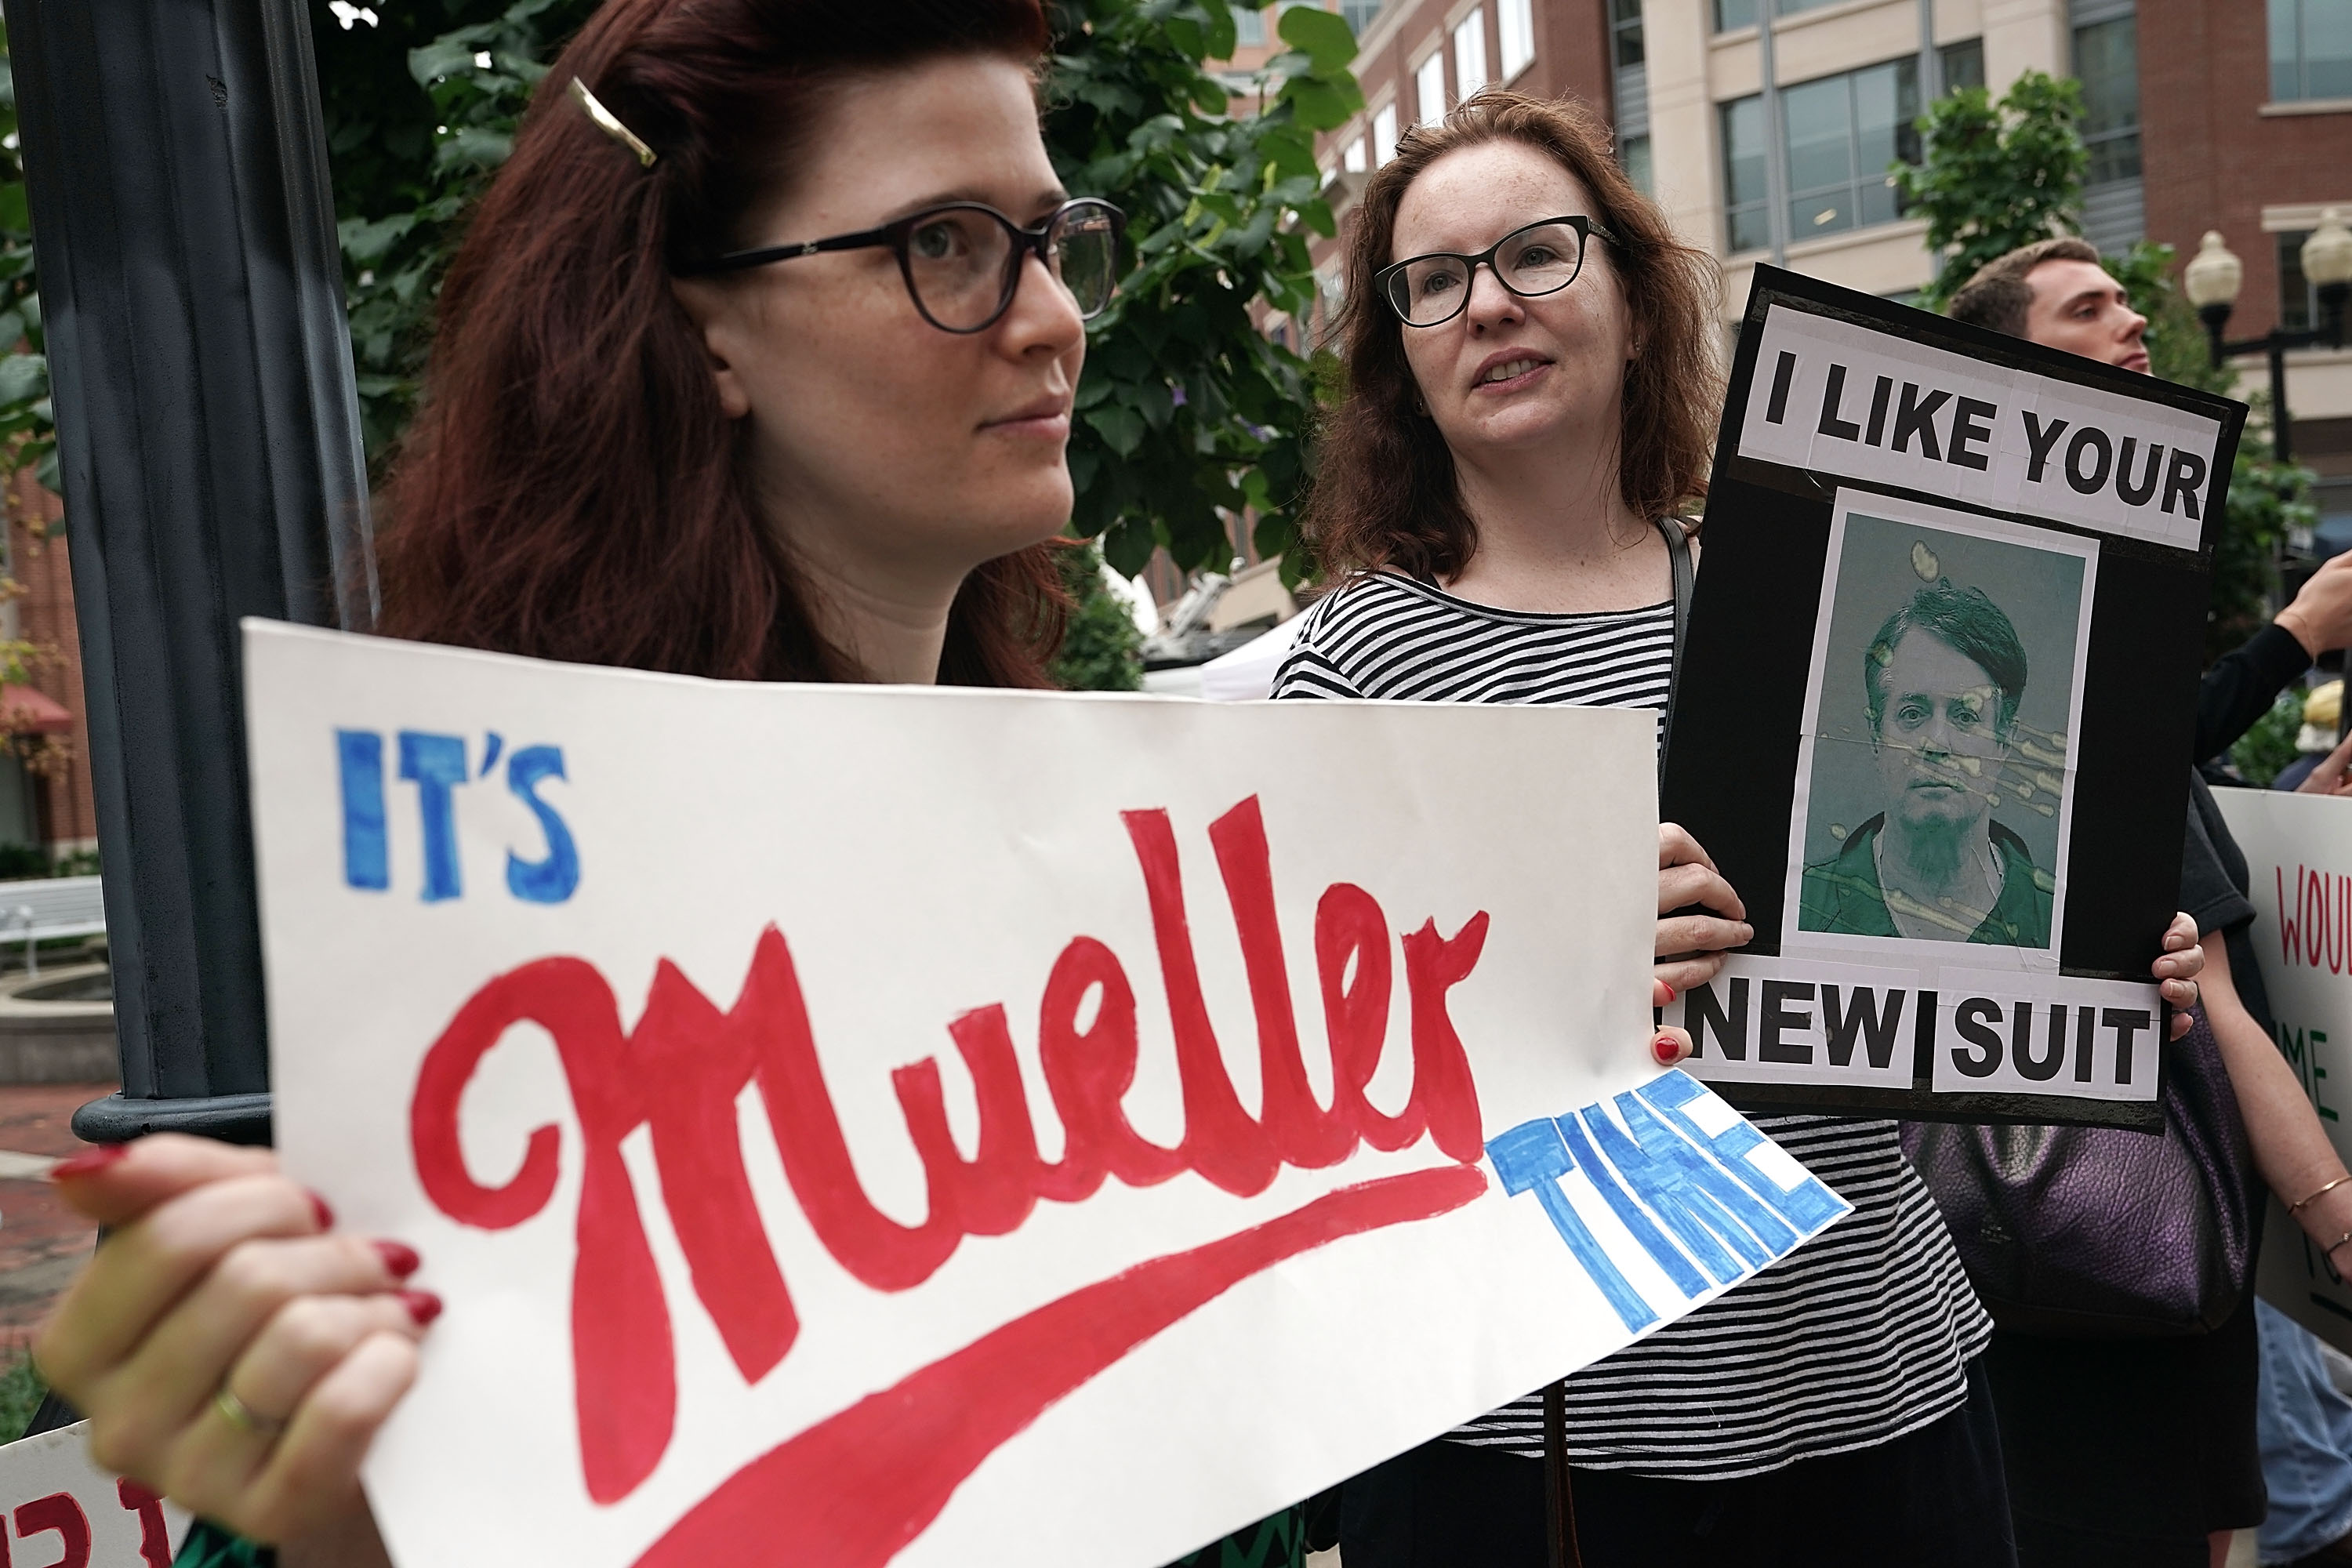 Activists hold signs during a protest outside the Albert V. Bryan United States Courthouse prior to the first day of the trial of former Trump campaign chairman Paul Manafort July 31, 2018 in Alexandria, Virginia. (Photo by Alex Wong/Getty Images)